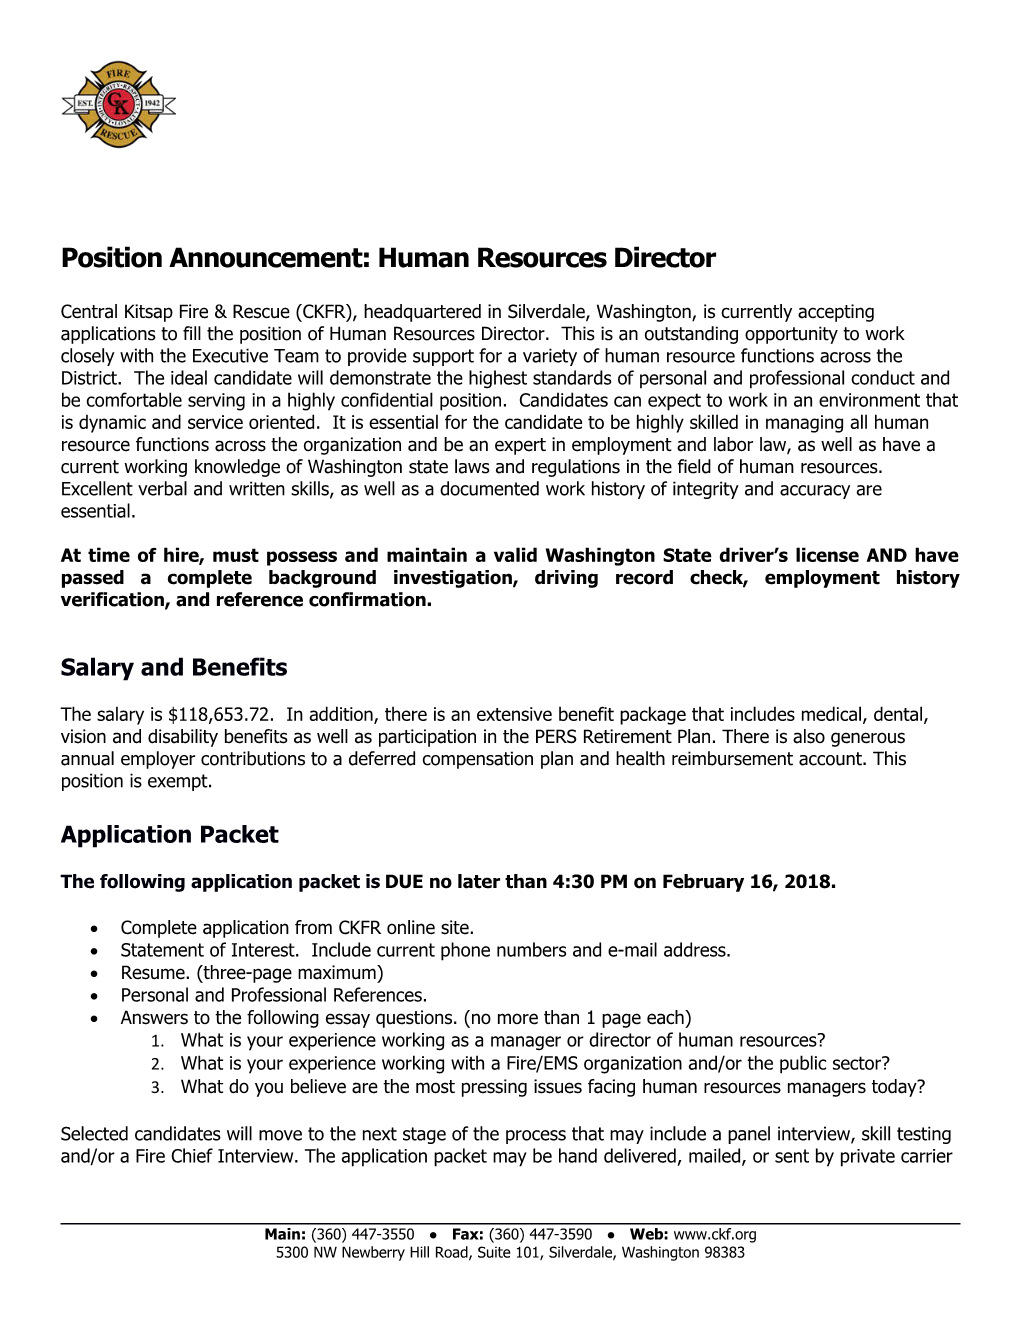 Position Announcement: Human Resources Director